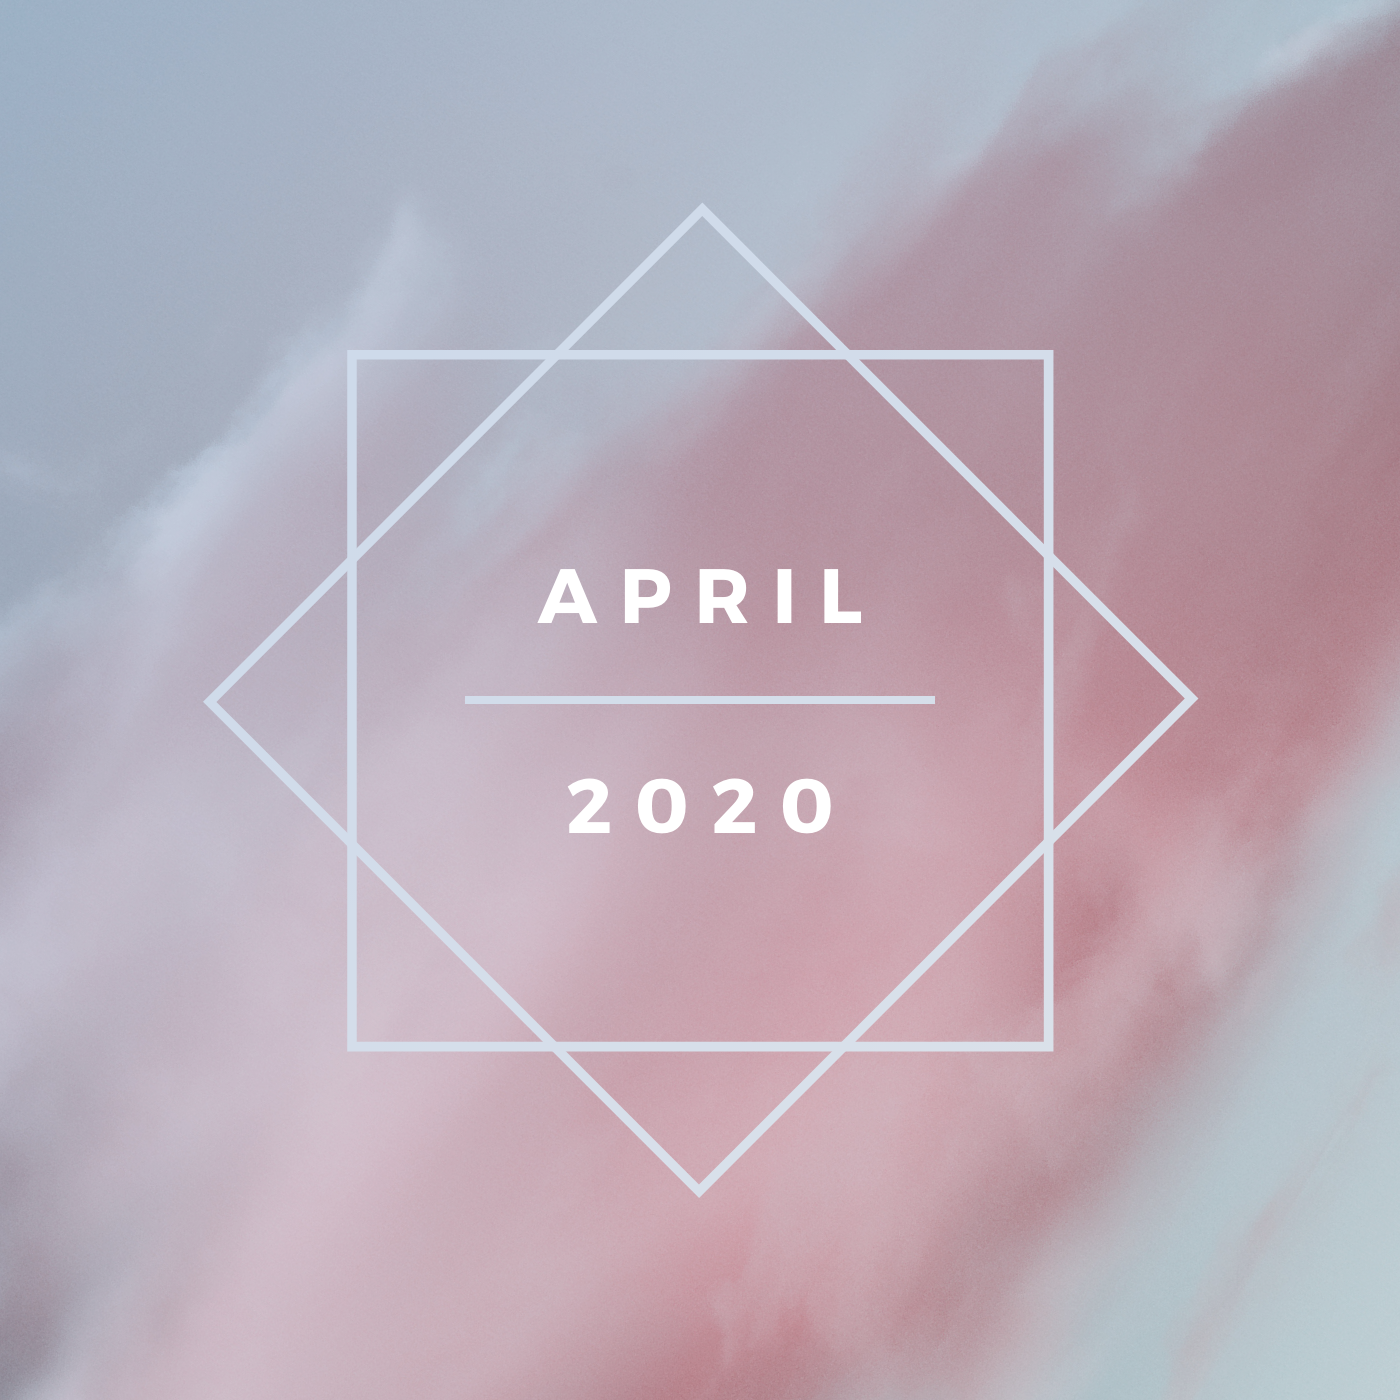 a square image of a gray-blue sky with a thick streak of pink clouds with two interlocking white boxes and white text saying april 2020